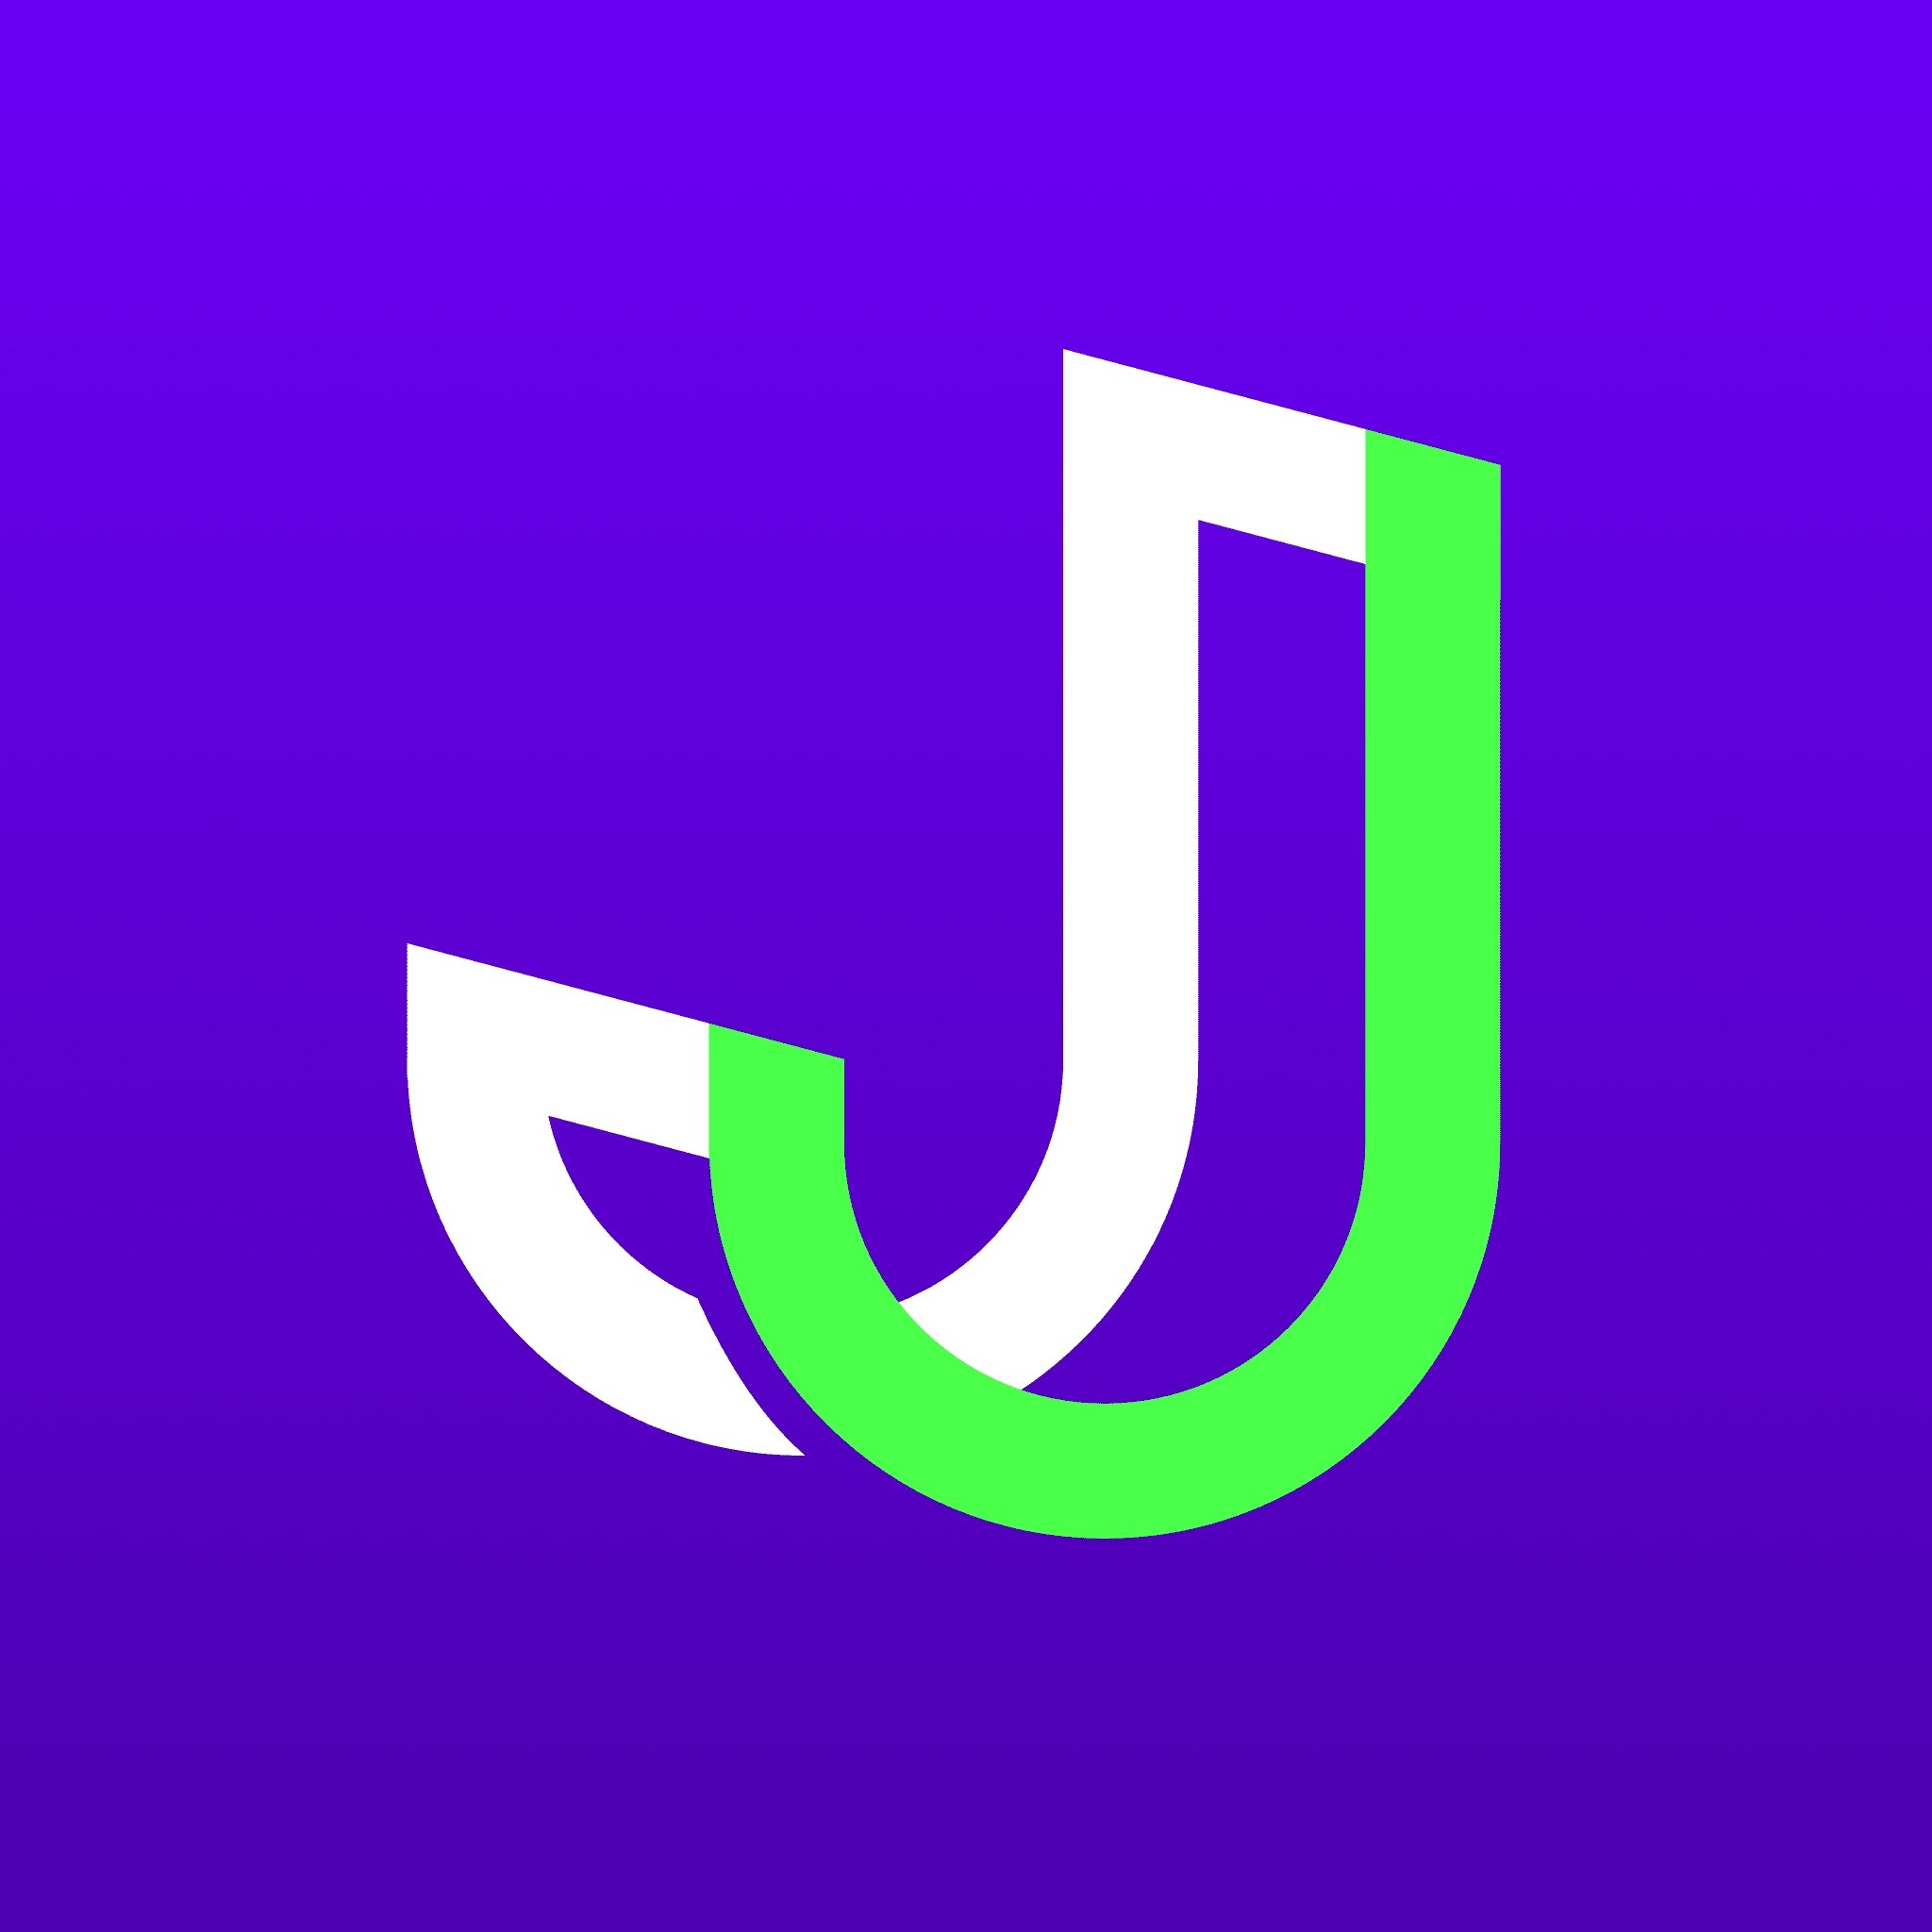 Jojoy APK Download for Android Free